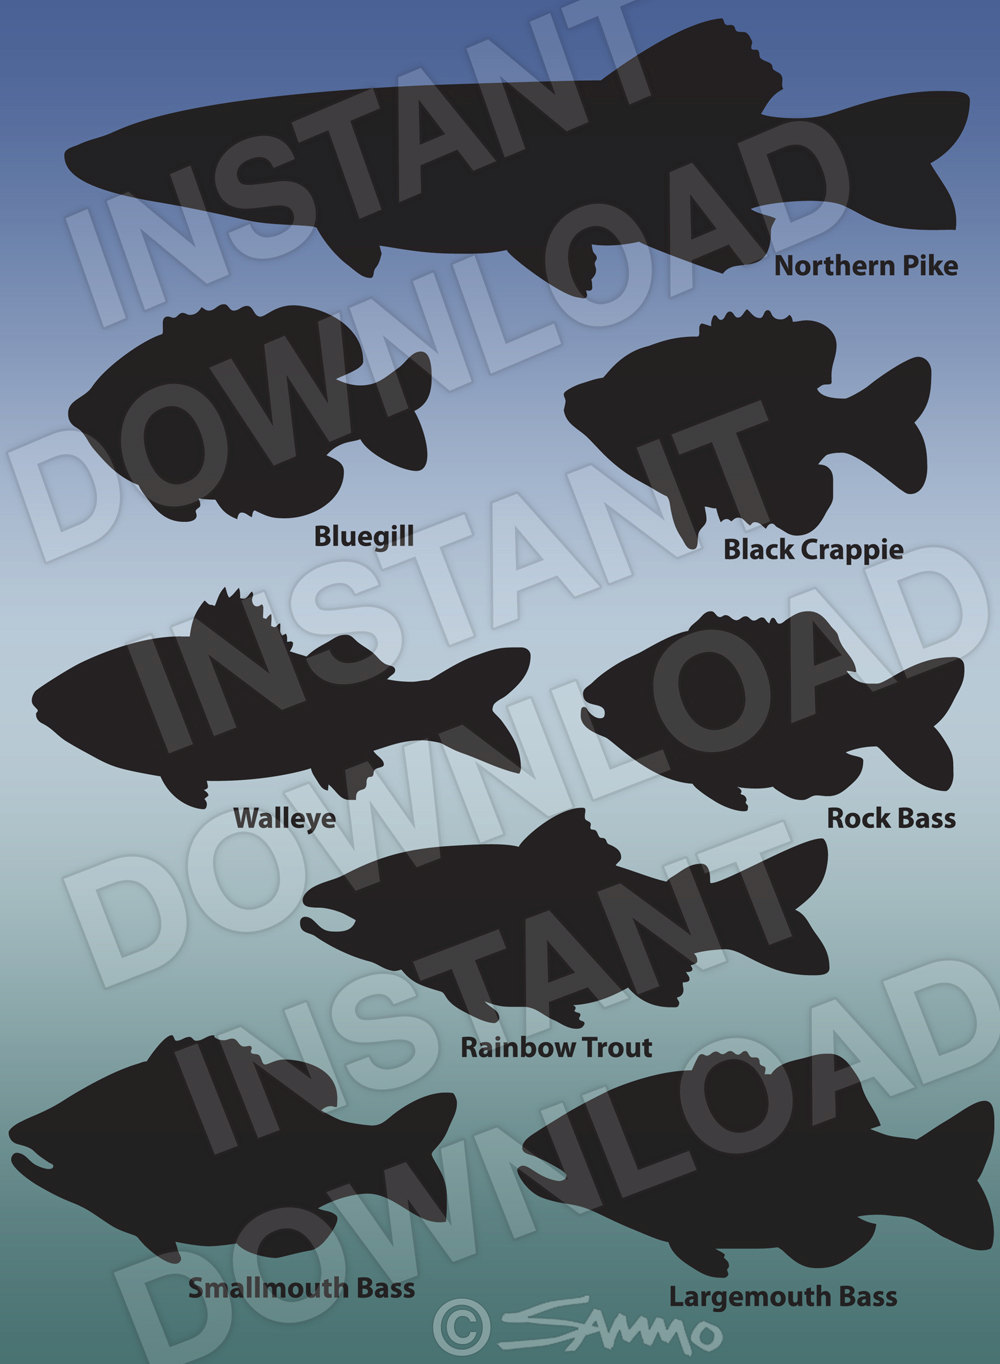 Bass clipart walleye. Assorted fish silhouettes pike